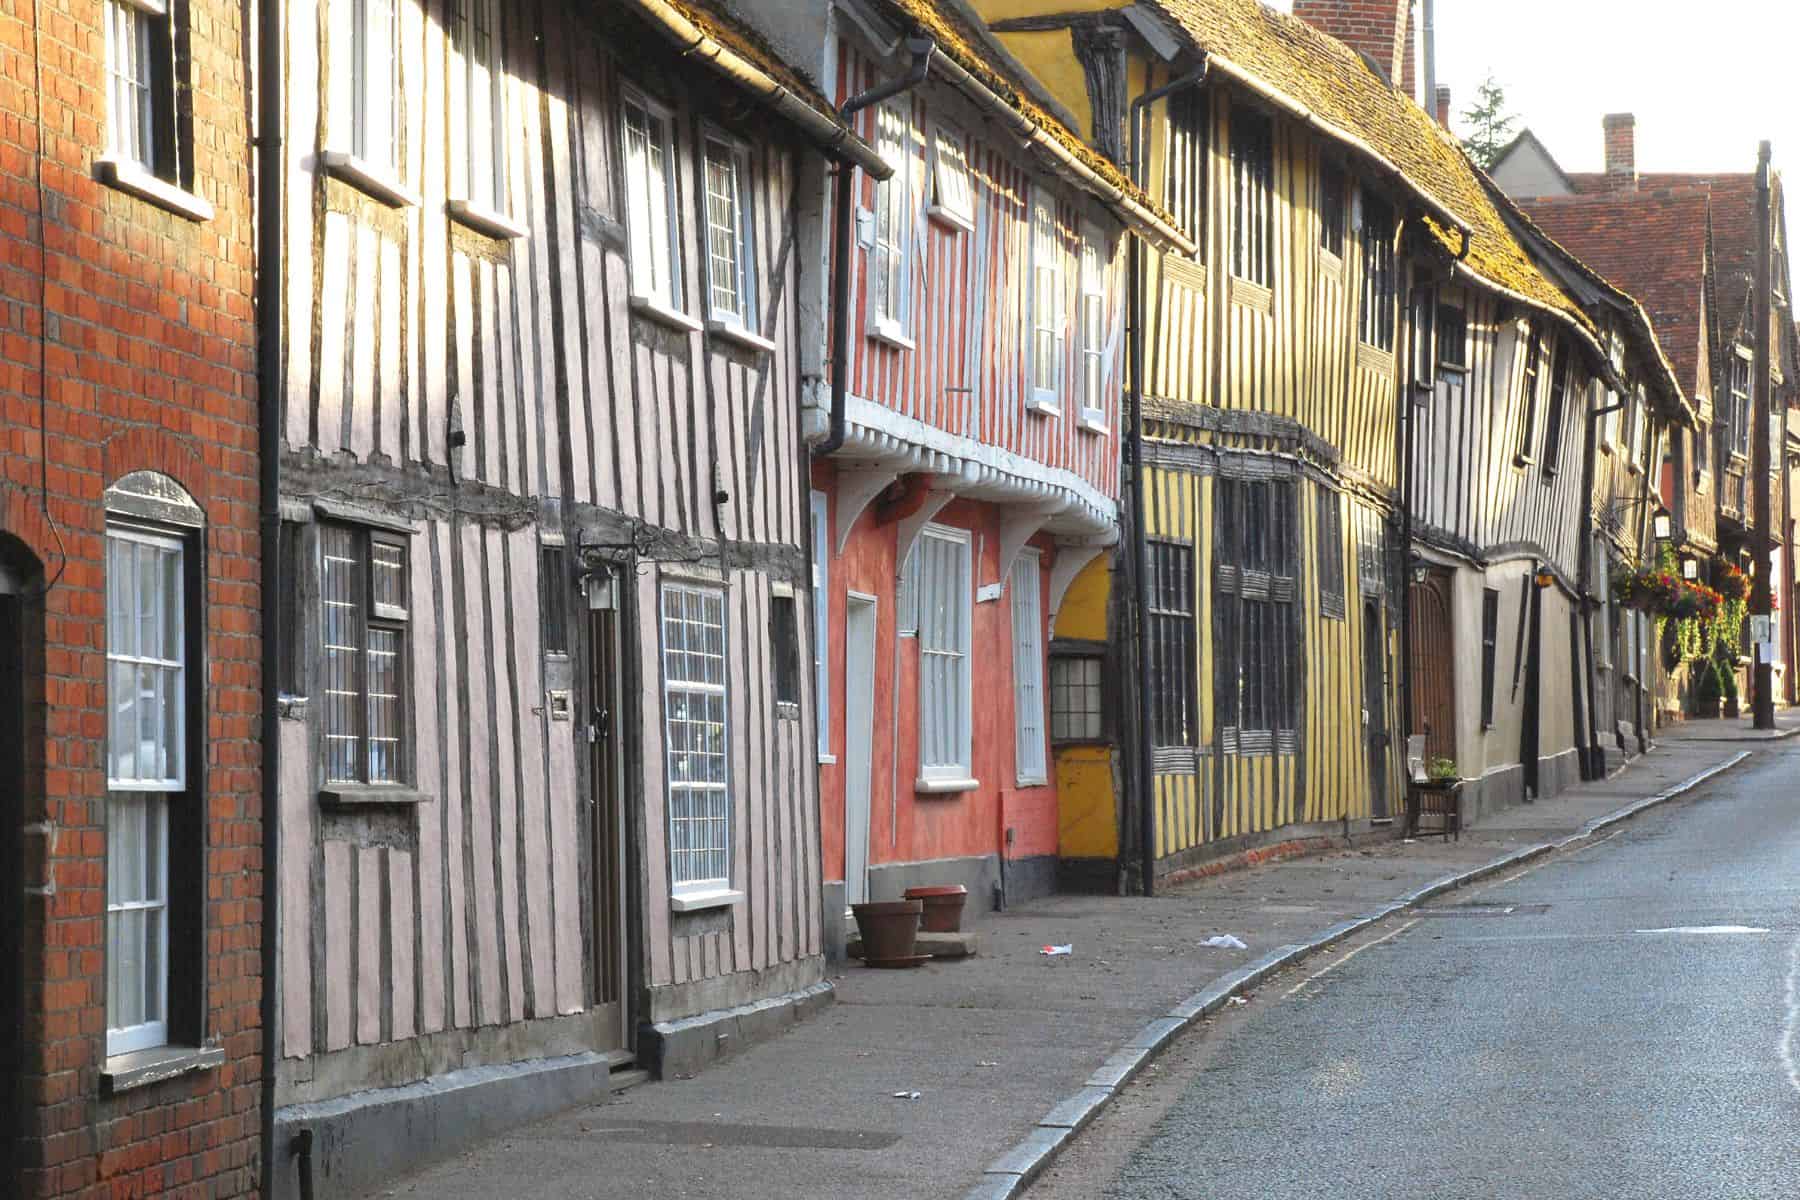 A street of colourful houses in Lavenham, Suffolk